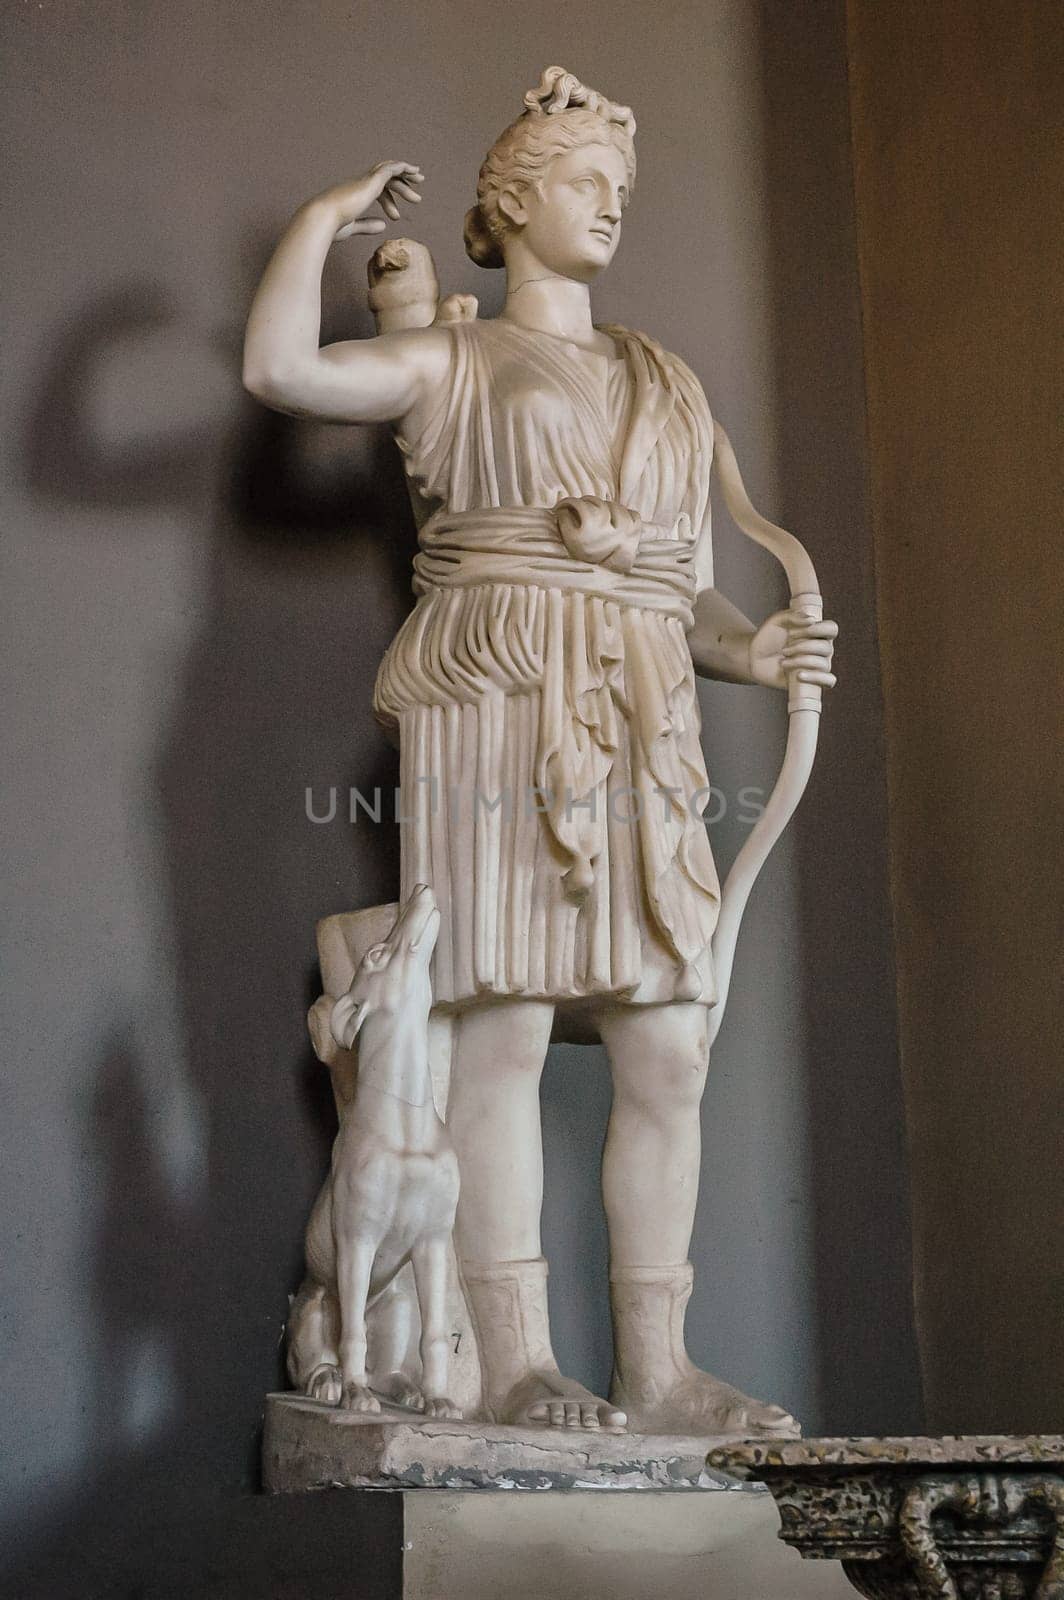 Vatican City, Italy, August 21, 2008: Statue of the goddess Diana. Pio Clementino Museum